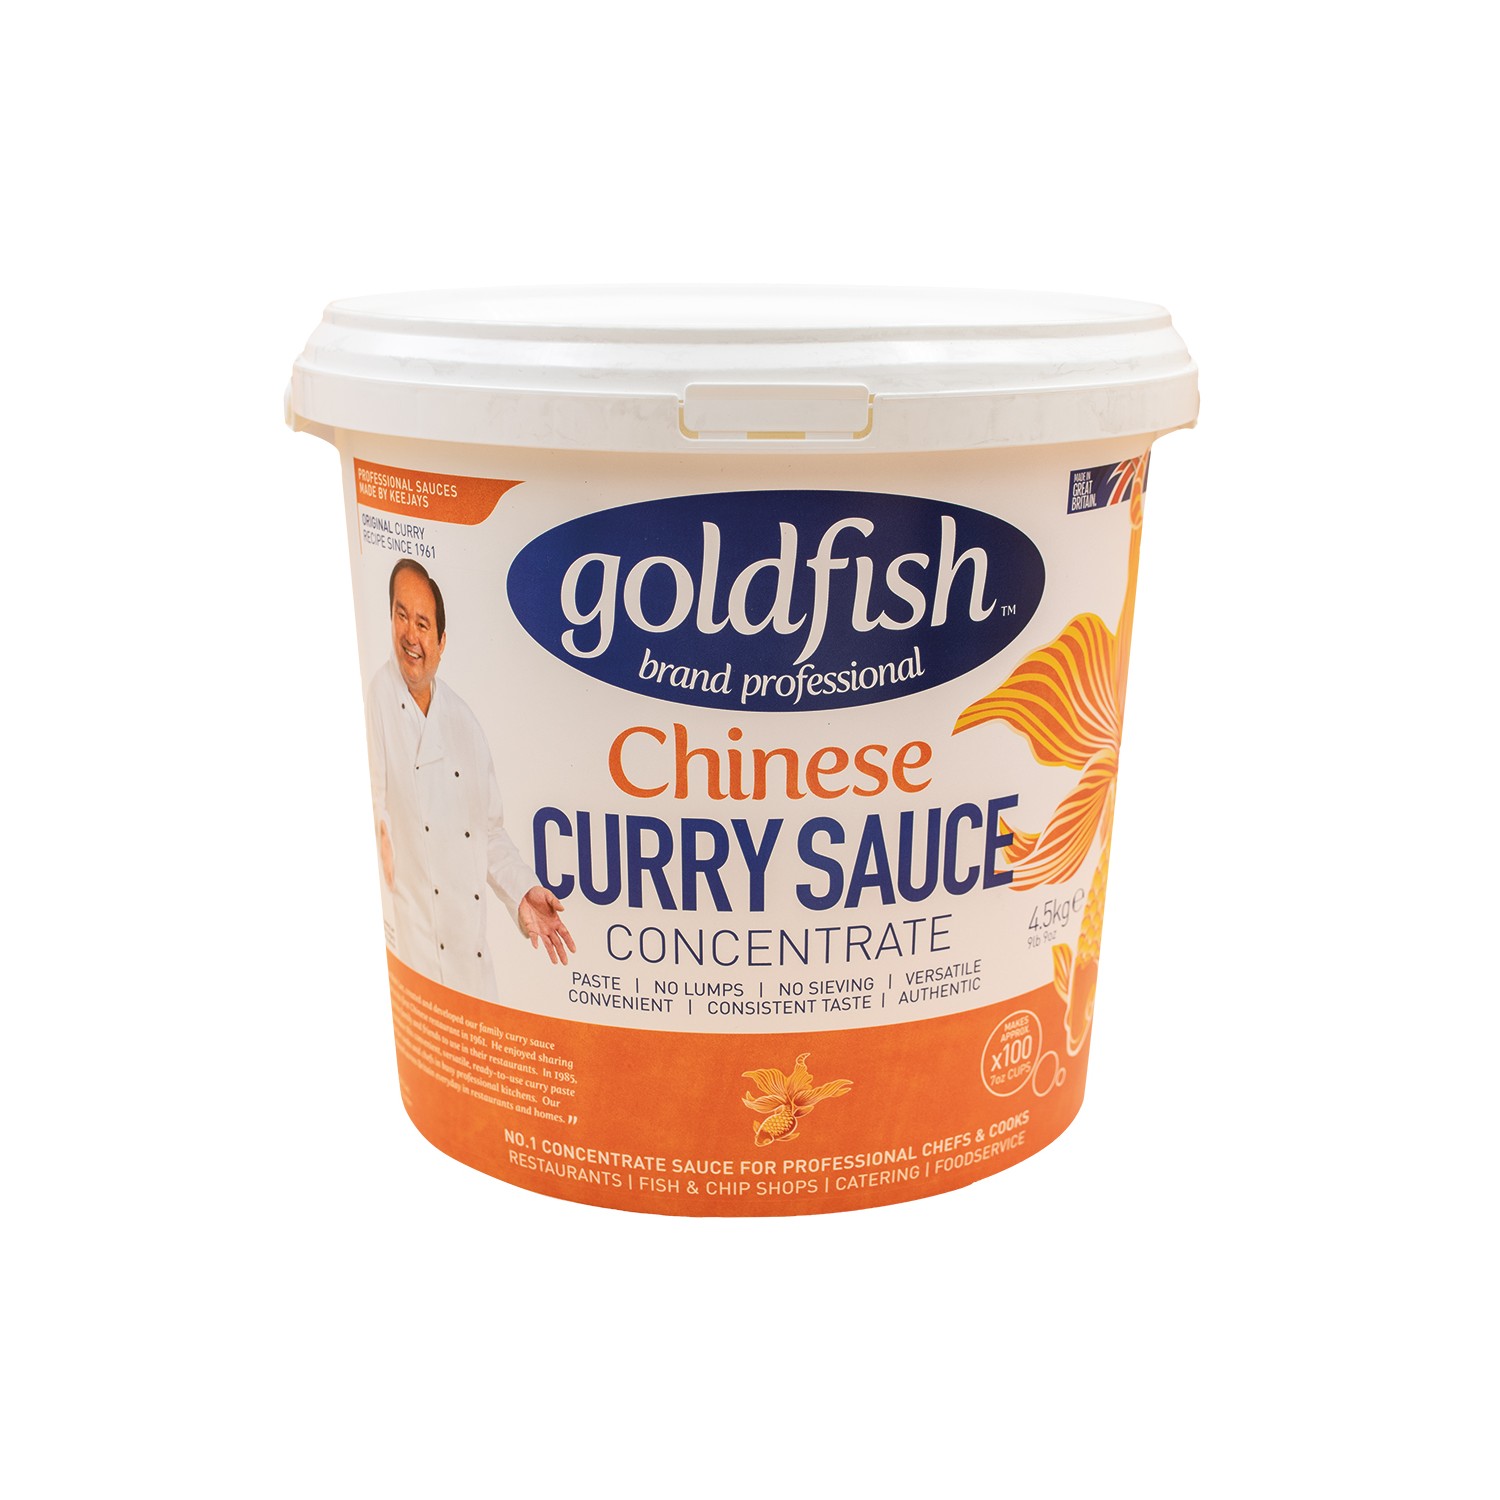 Goldfish Curry Sauce Concentrate 4.5kg Tub Chinese Curry Paste